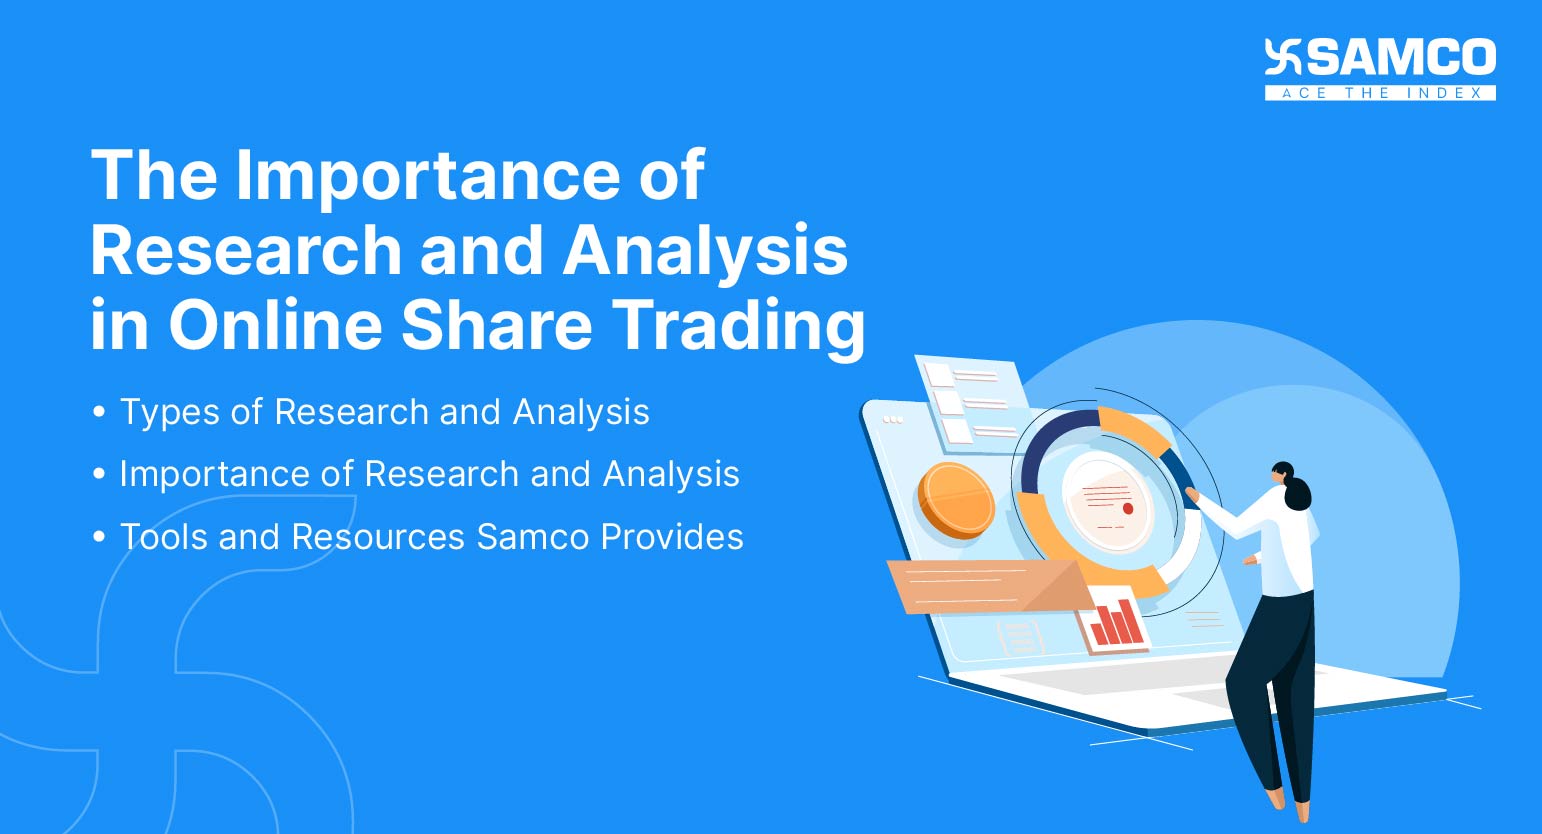 The Importance of Research and Analysis in Online Share Trading